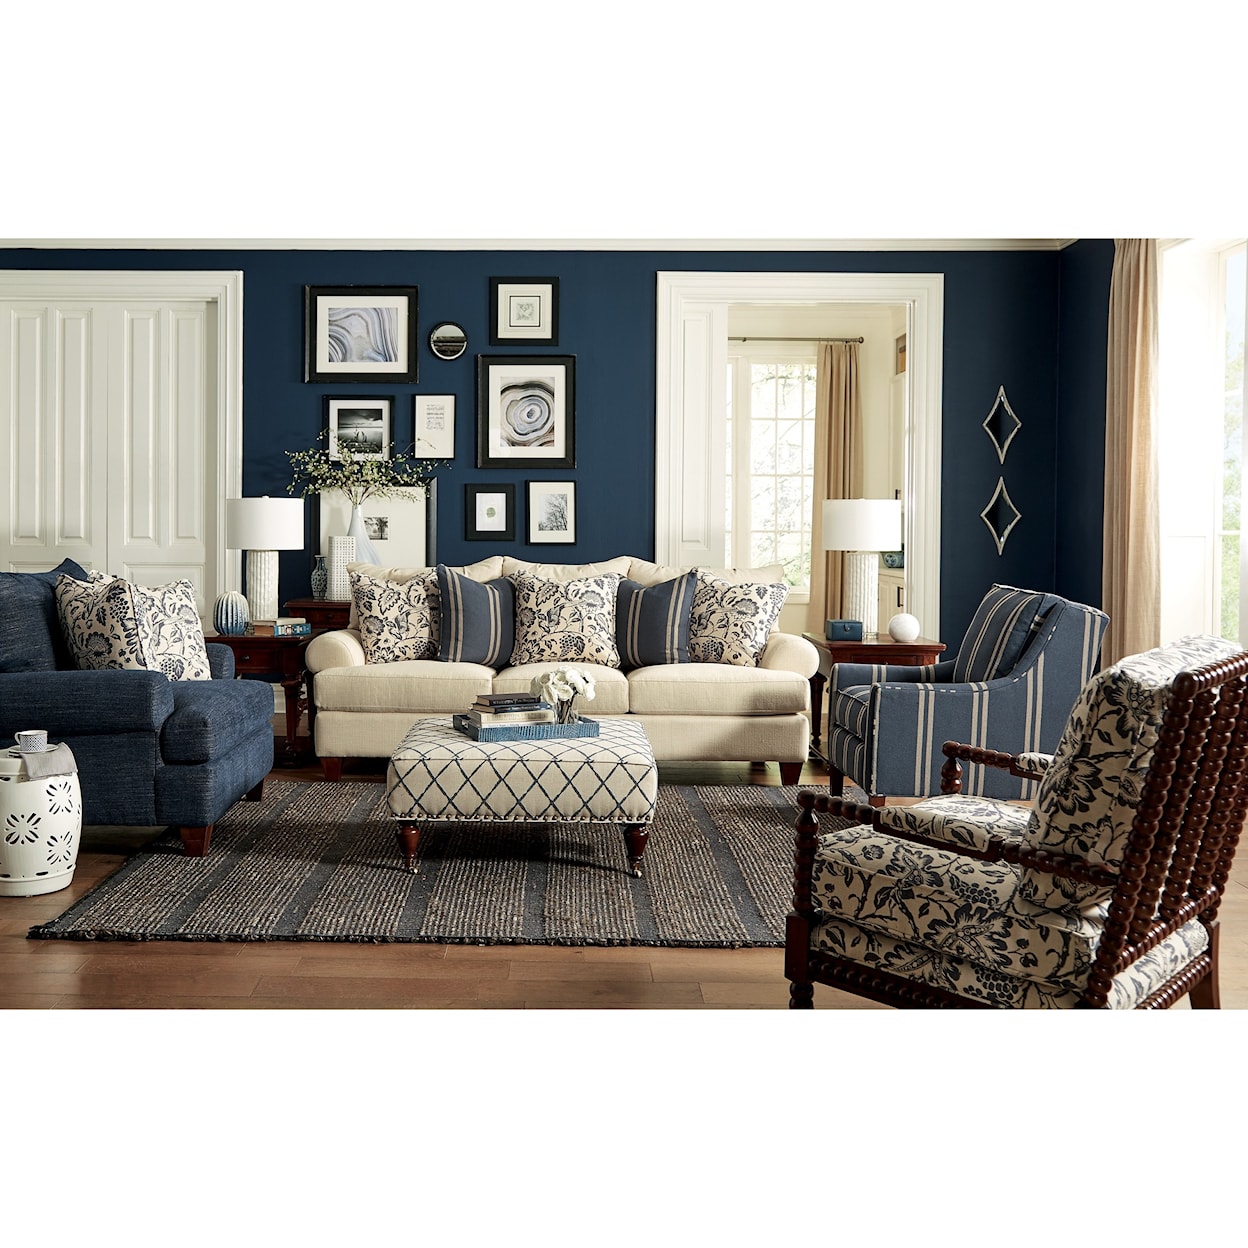 Paula Deen by Craftmaster P781650 Living Room Group